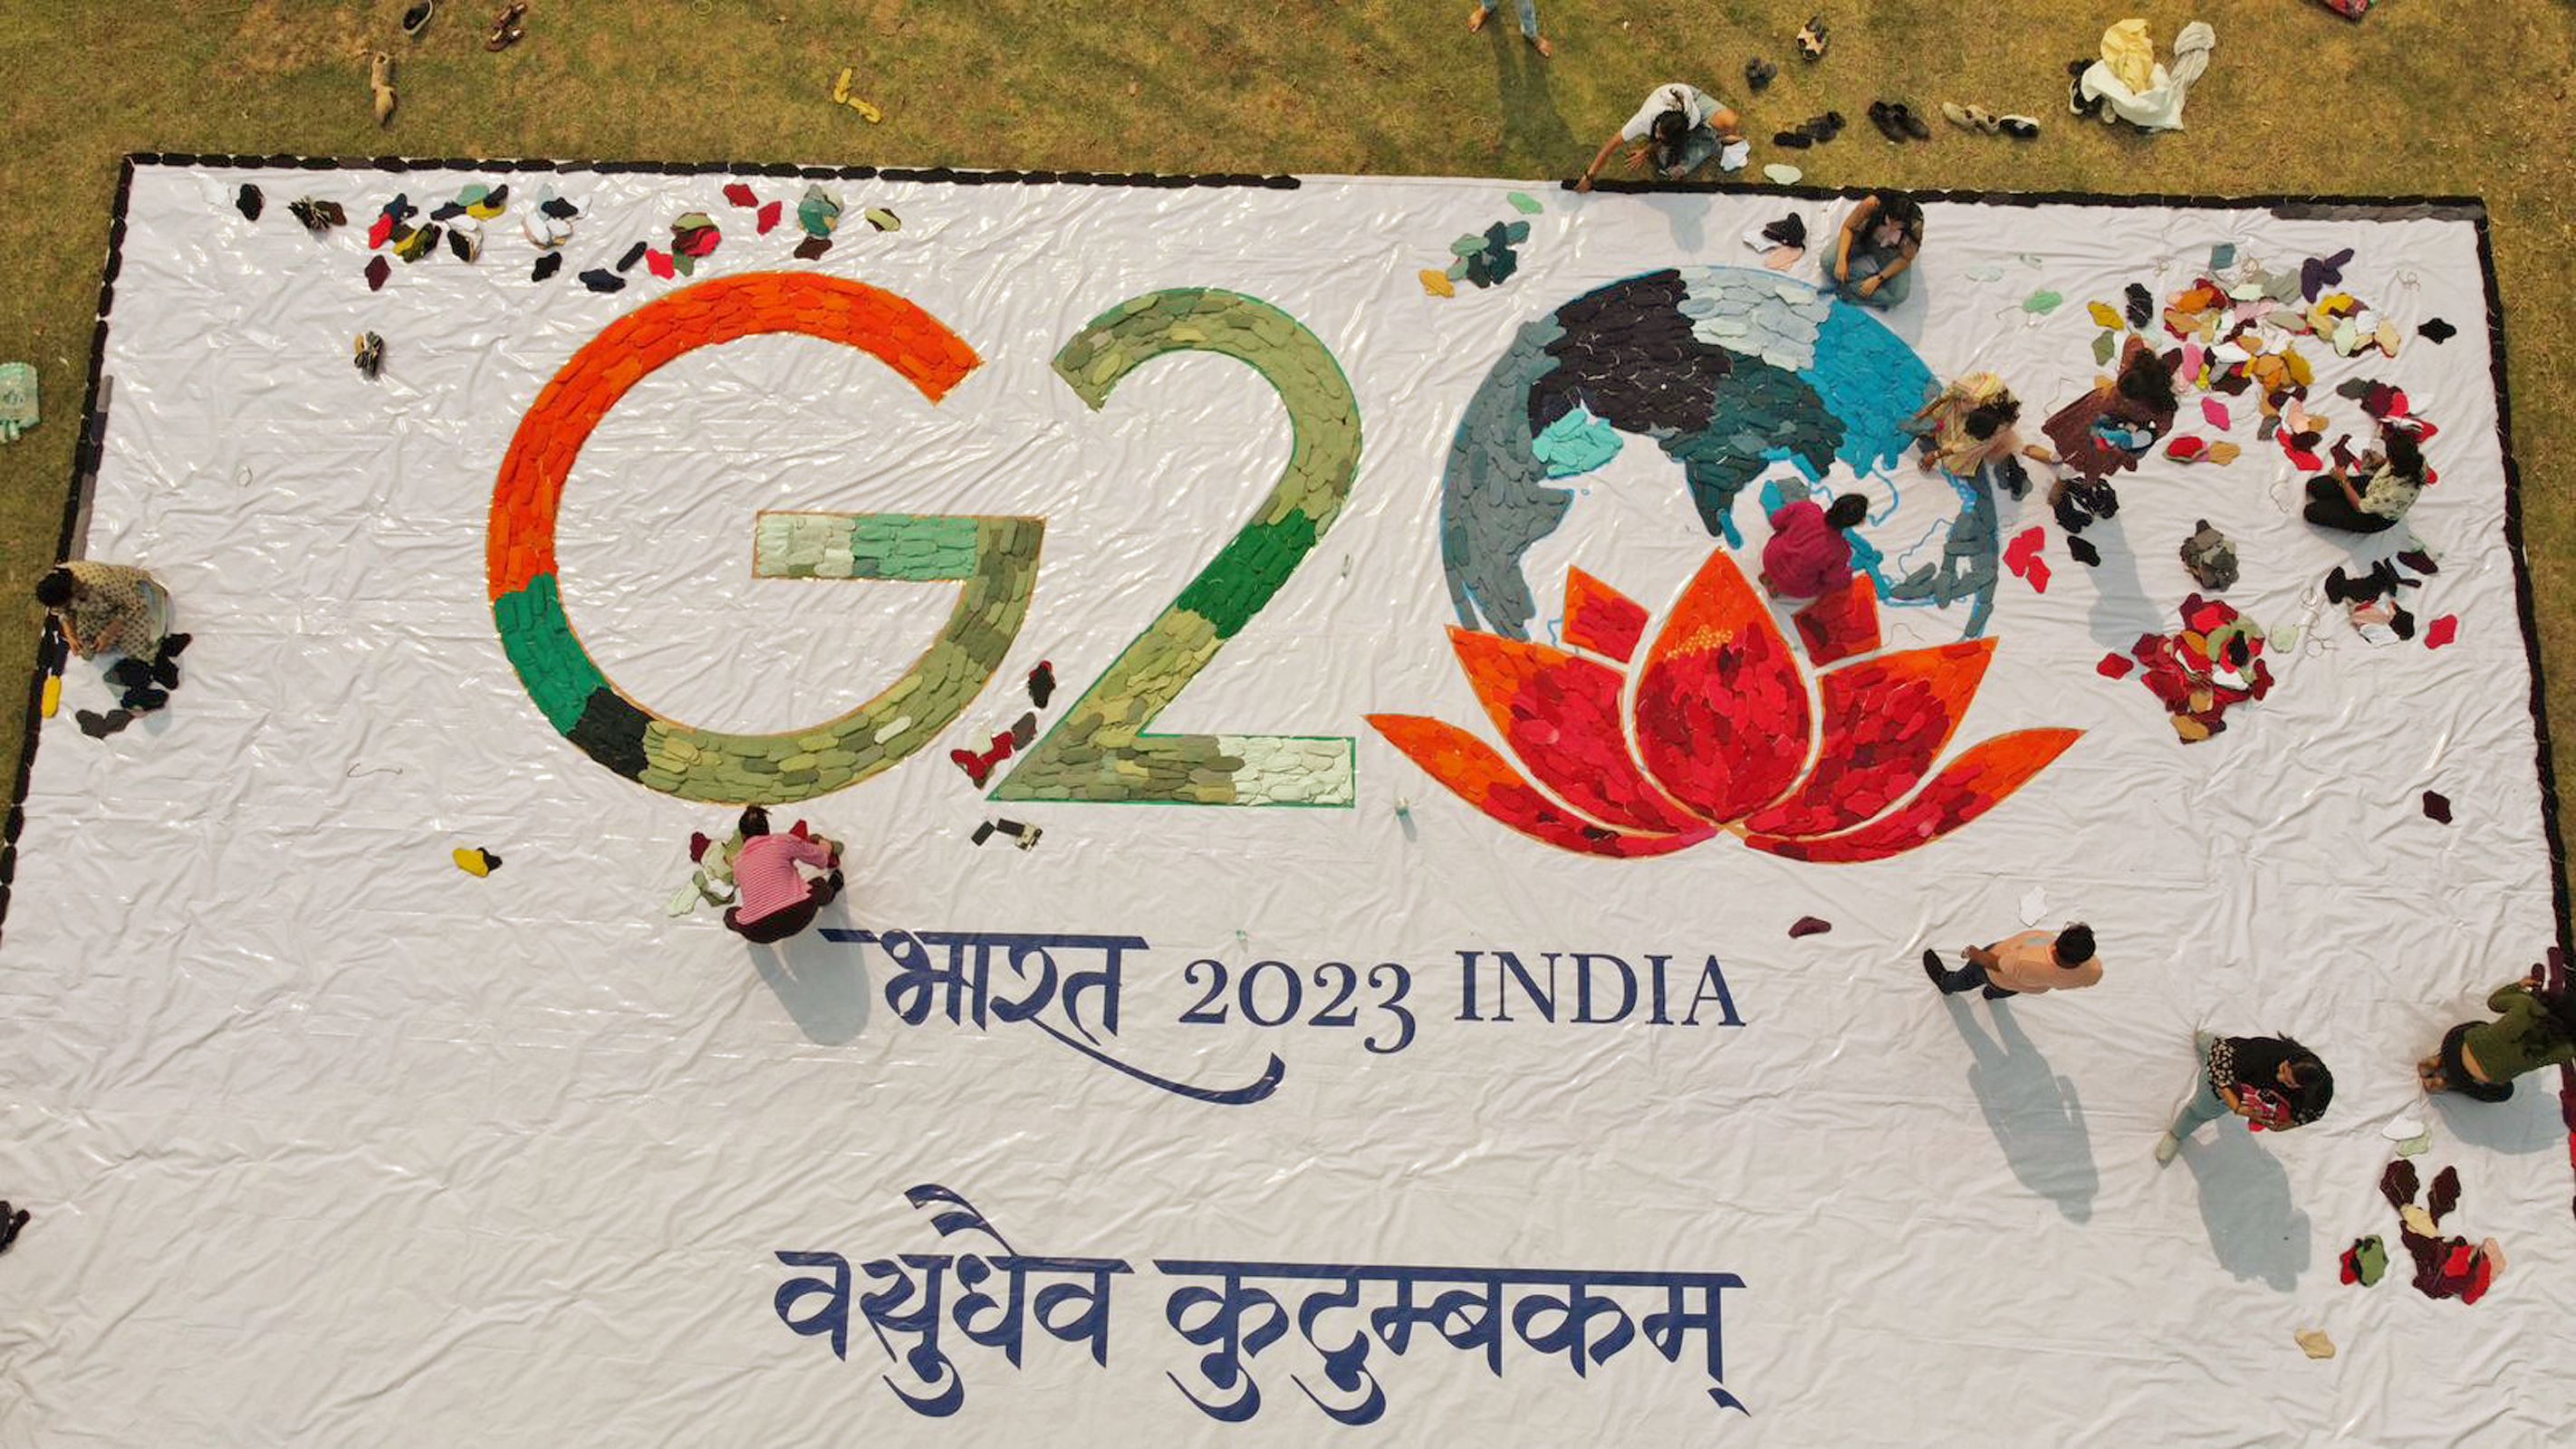 How a strong Indian economy is leading the G-20 group and fueling Asia’s ascendancy